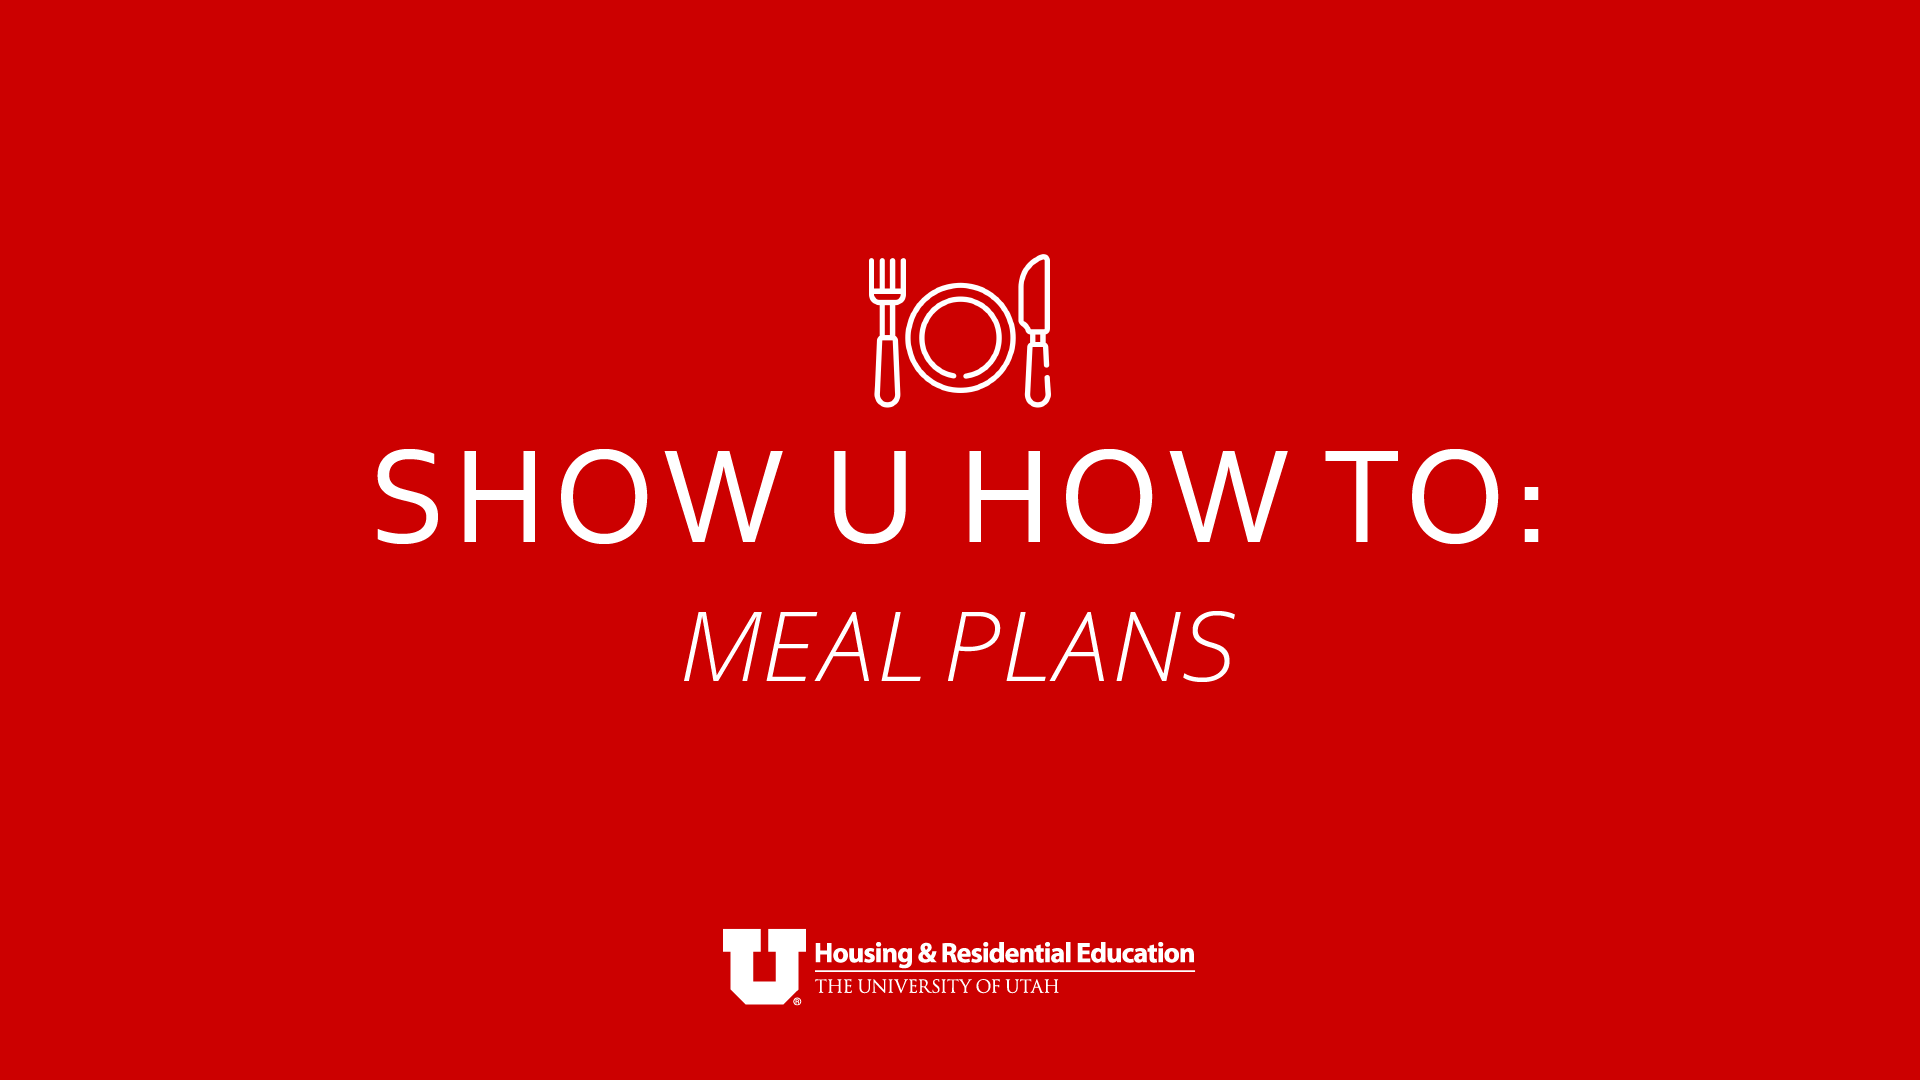 a red background with white text reading "Show U How To: Meal Plans" on the center of the image. Above that is a line drawing of a plate with a fork on the left and knife on the right. At the center bottom of the image is the HRE logo.